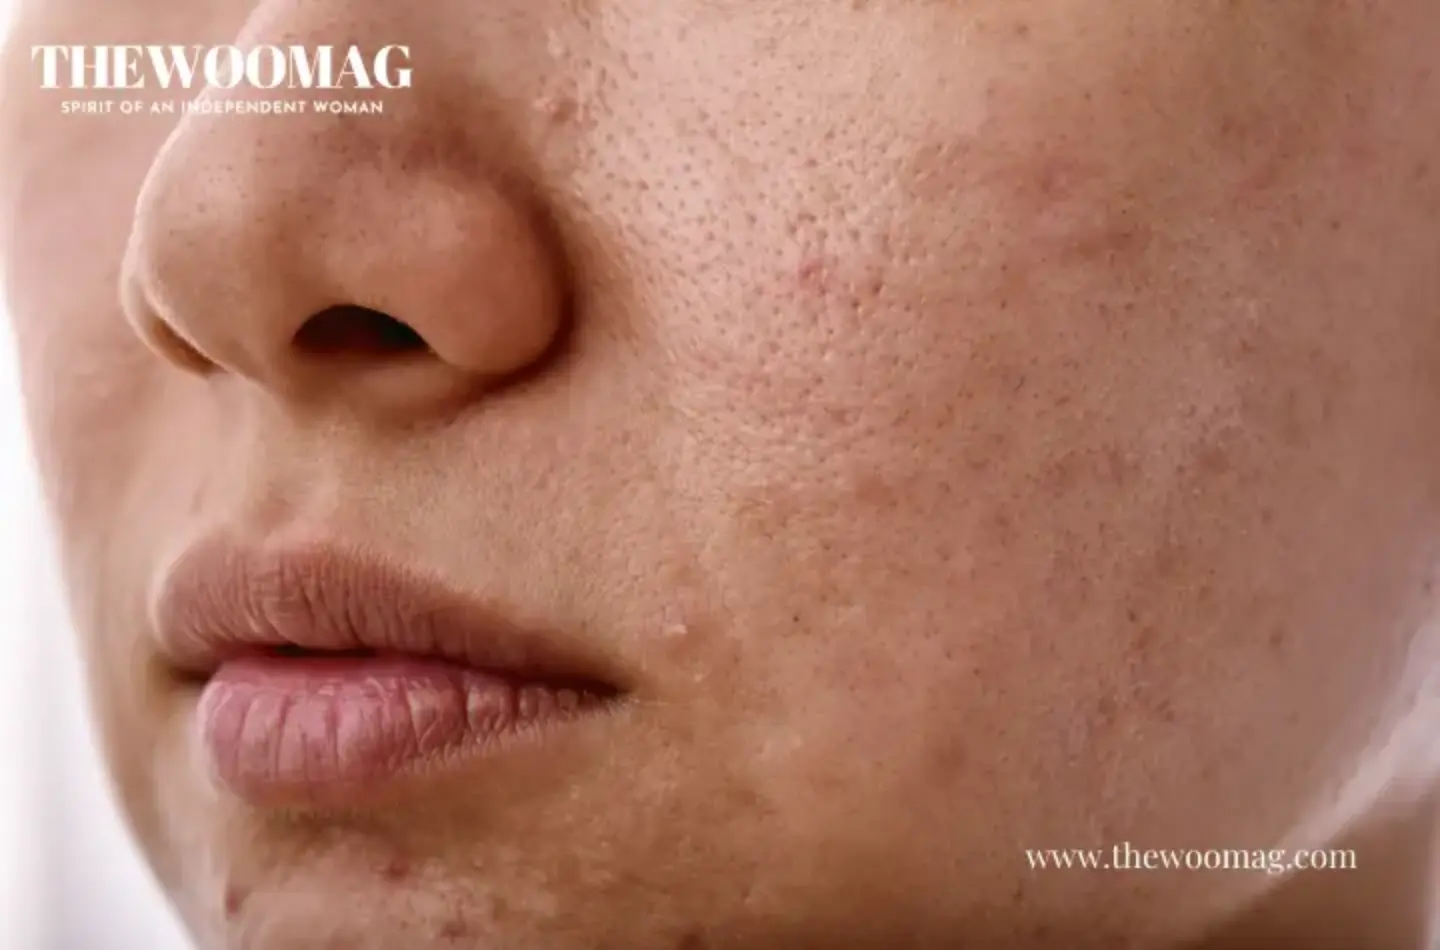 Get Rid Of Acne and Injury Scars with DIY Home Remedies